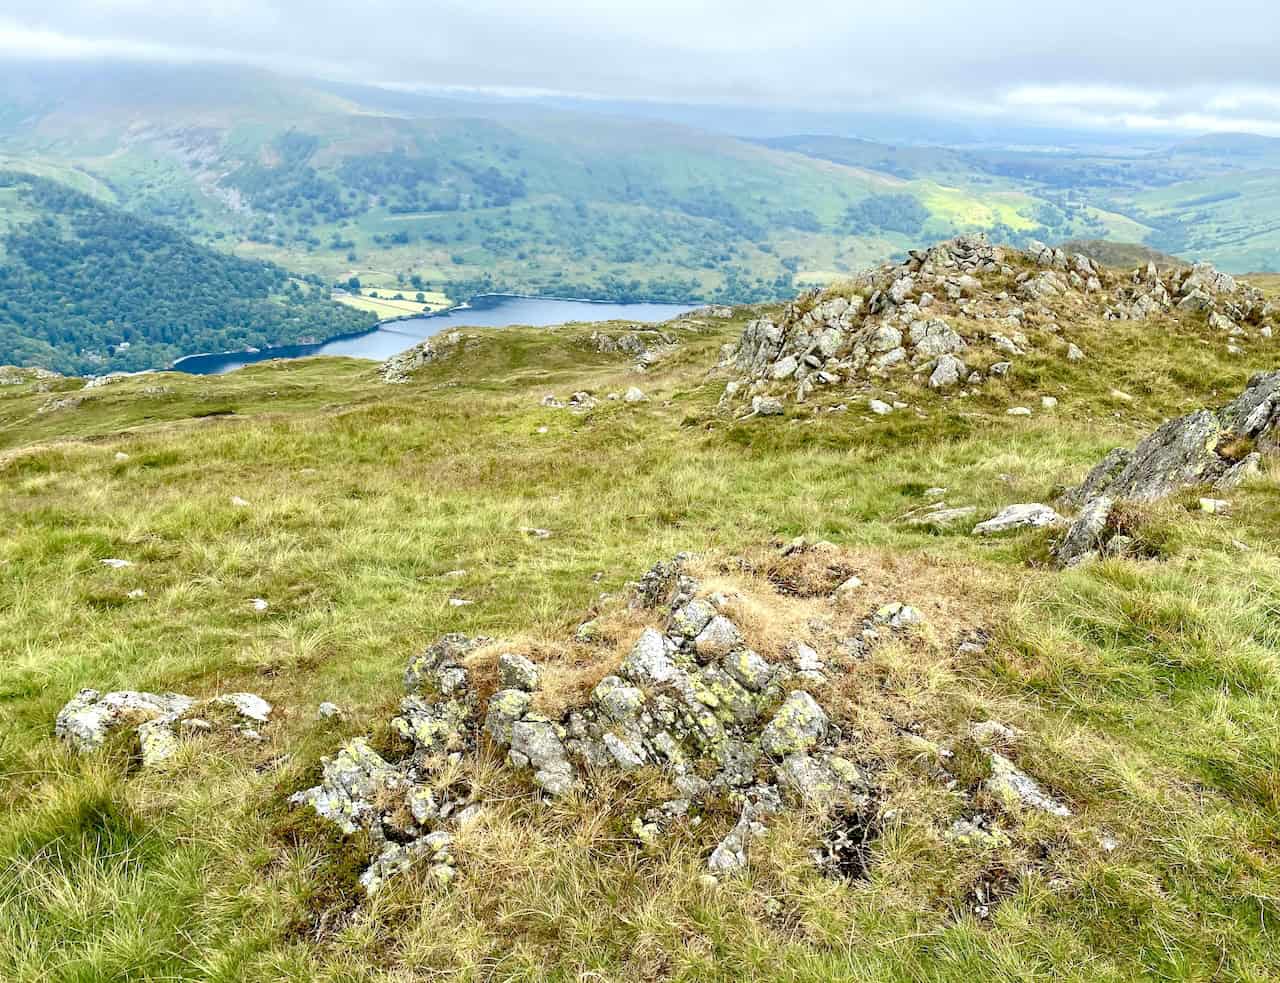 Superb views from Place Fell down to Glenridding and Ullswater. We're about one-quarter of the way round our Place Fell walk.